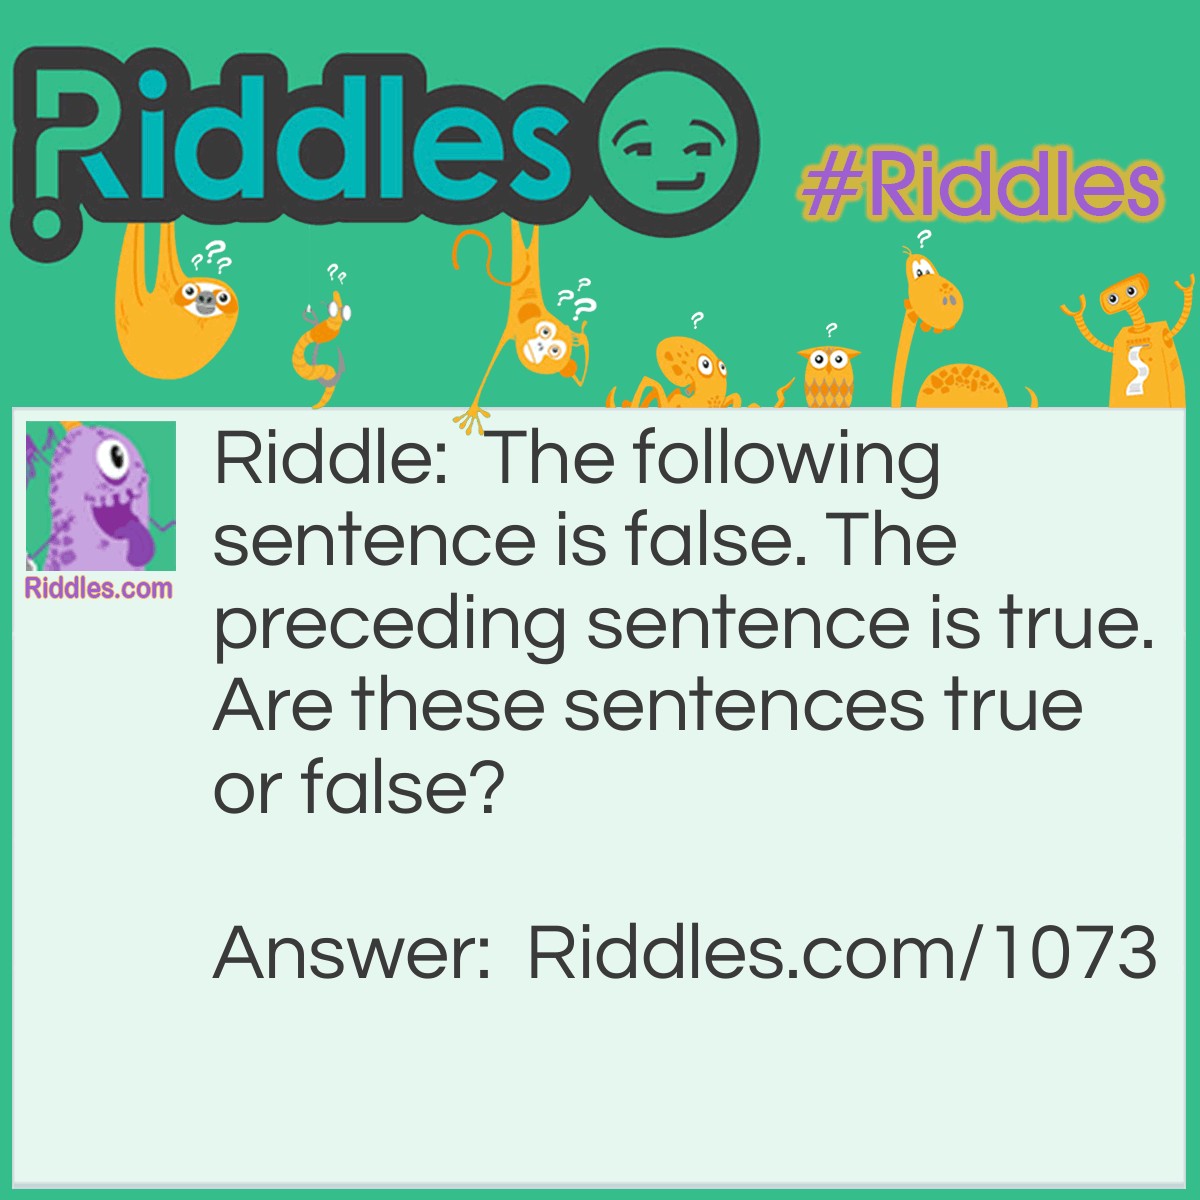 Riddle: The following sentence is false. The preceding sentence is true. Are these sentences true or false? Answer: Neither, it's a paradox. If the first is true, then the second must be false, which makes the first false? it doesn't work.